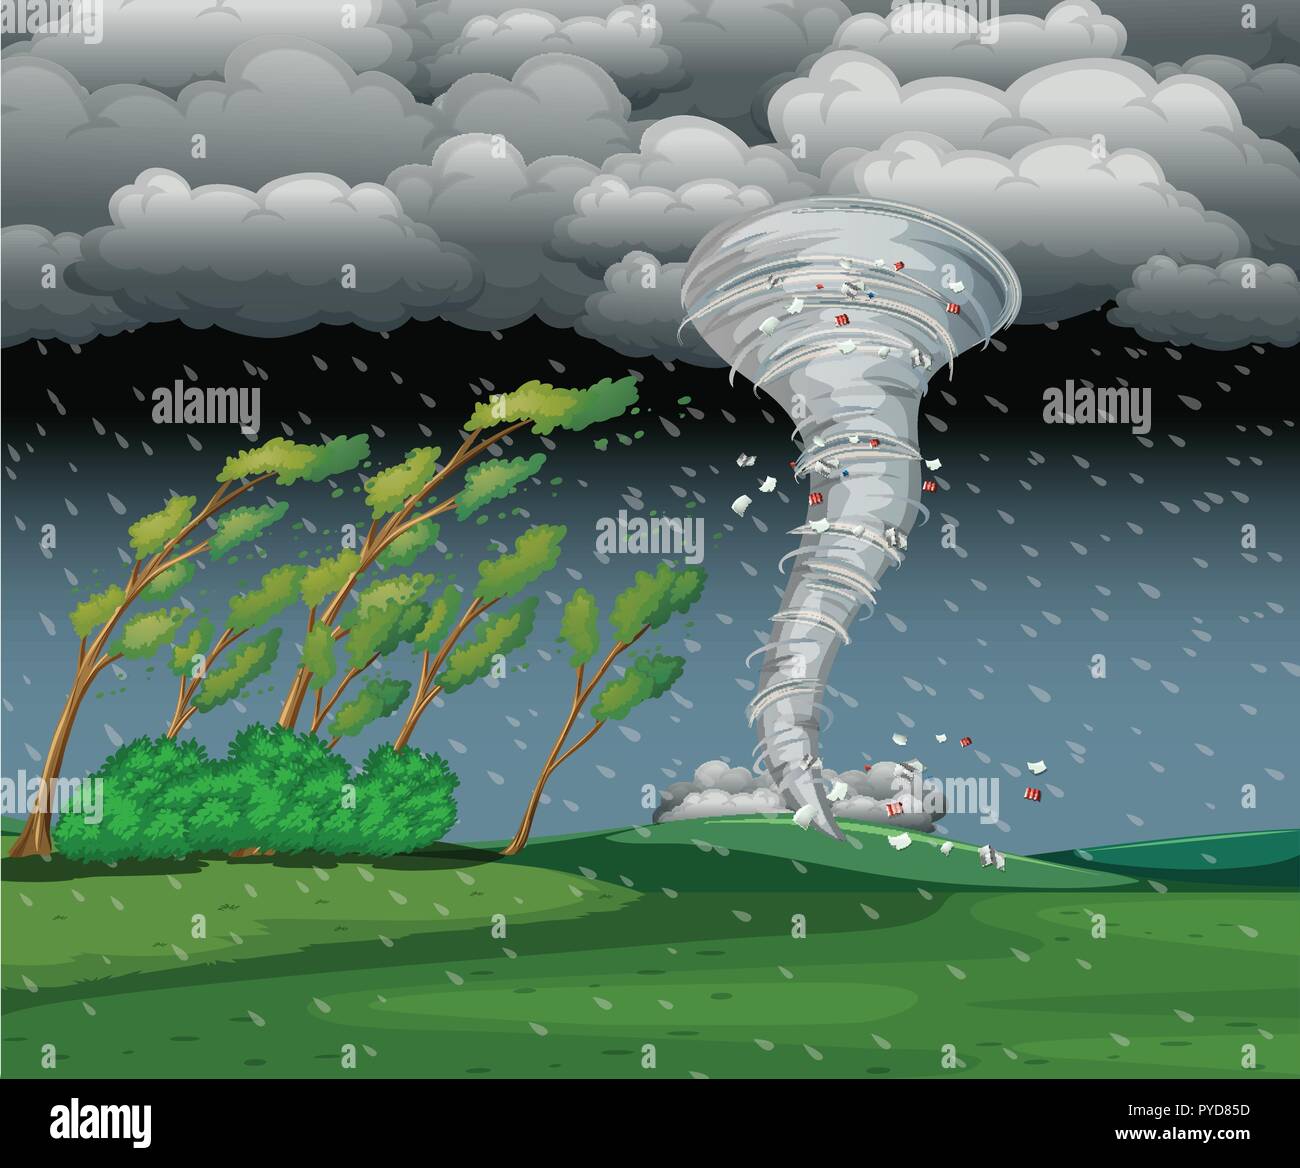 Cyclone in the rainy storm illustration Stock Vector Image & Art - Alamy